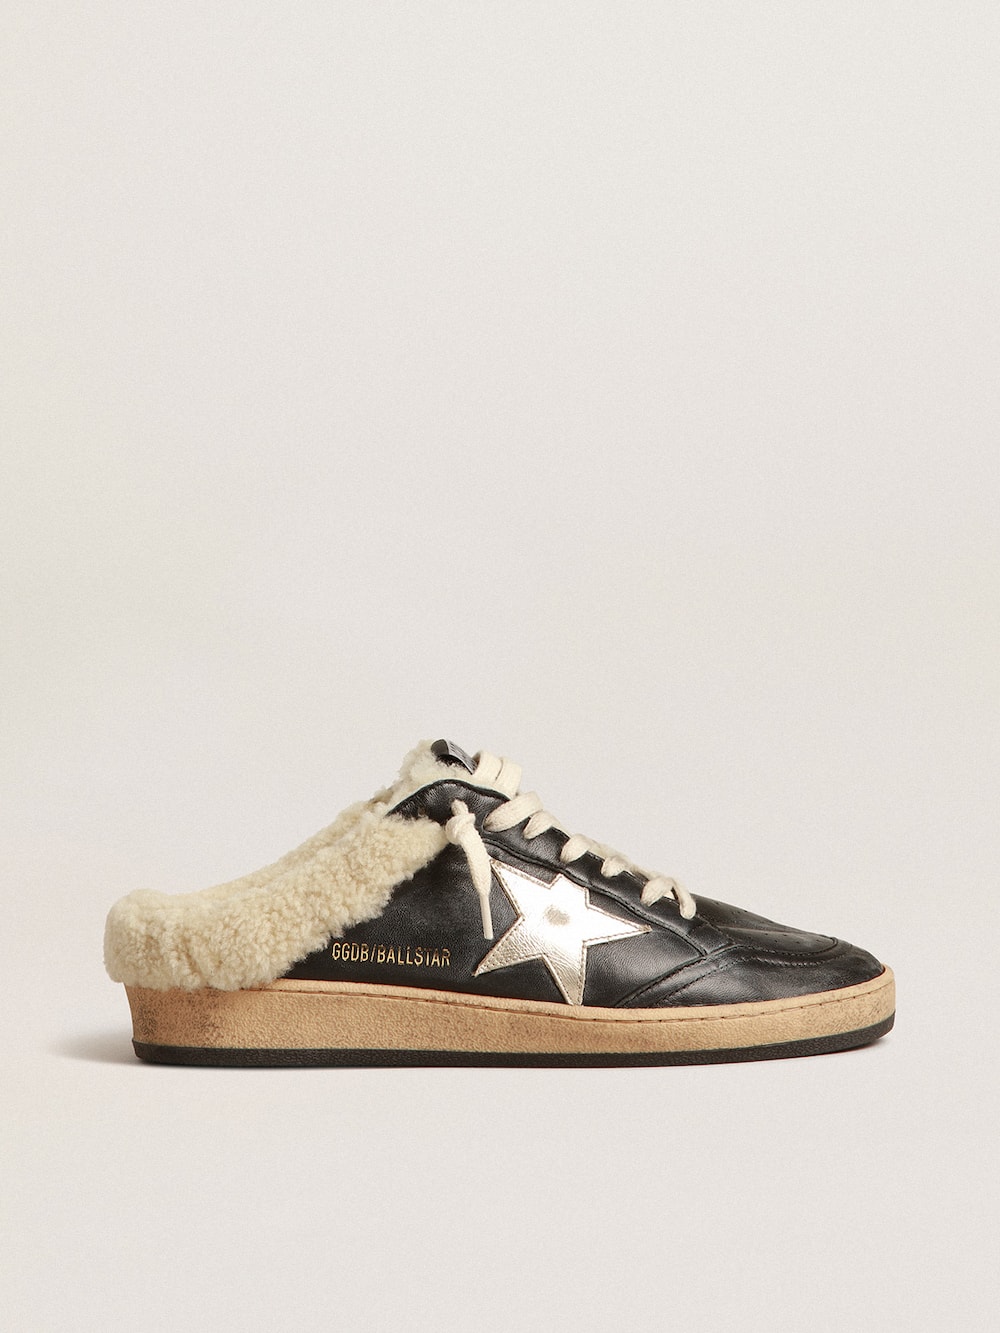 Golden Goose - Ball Star Sabots in nappa with platinum star and shearling lining in 